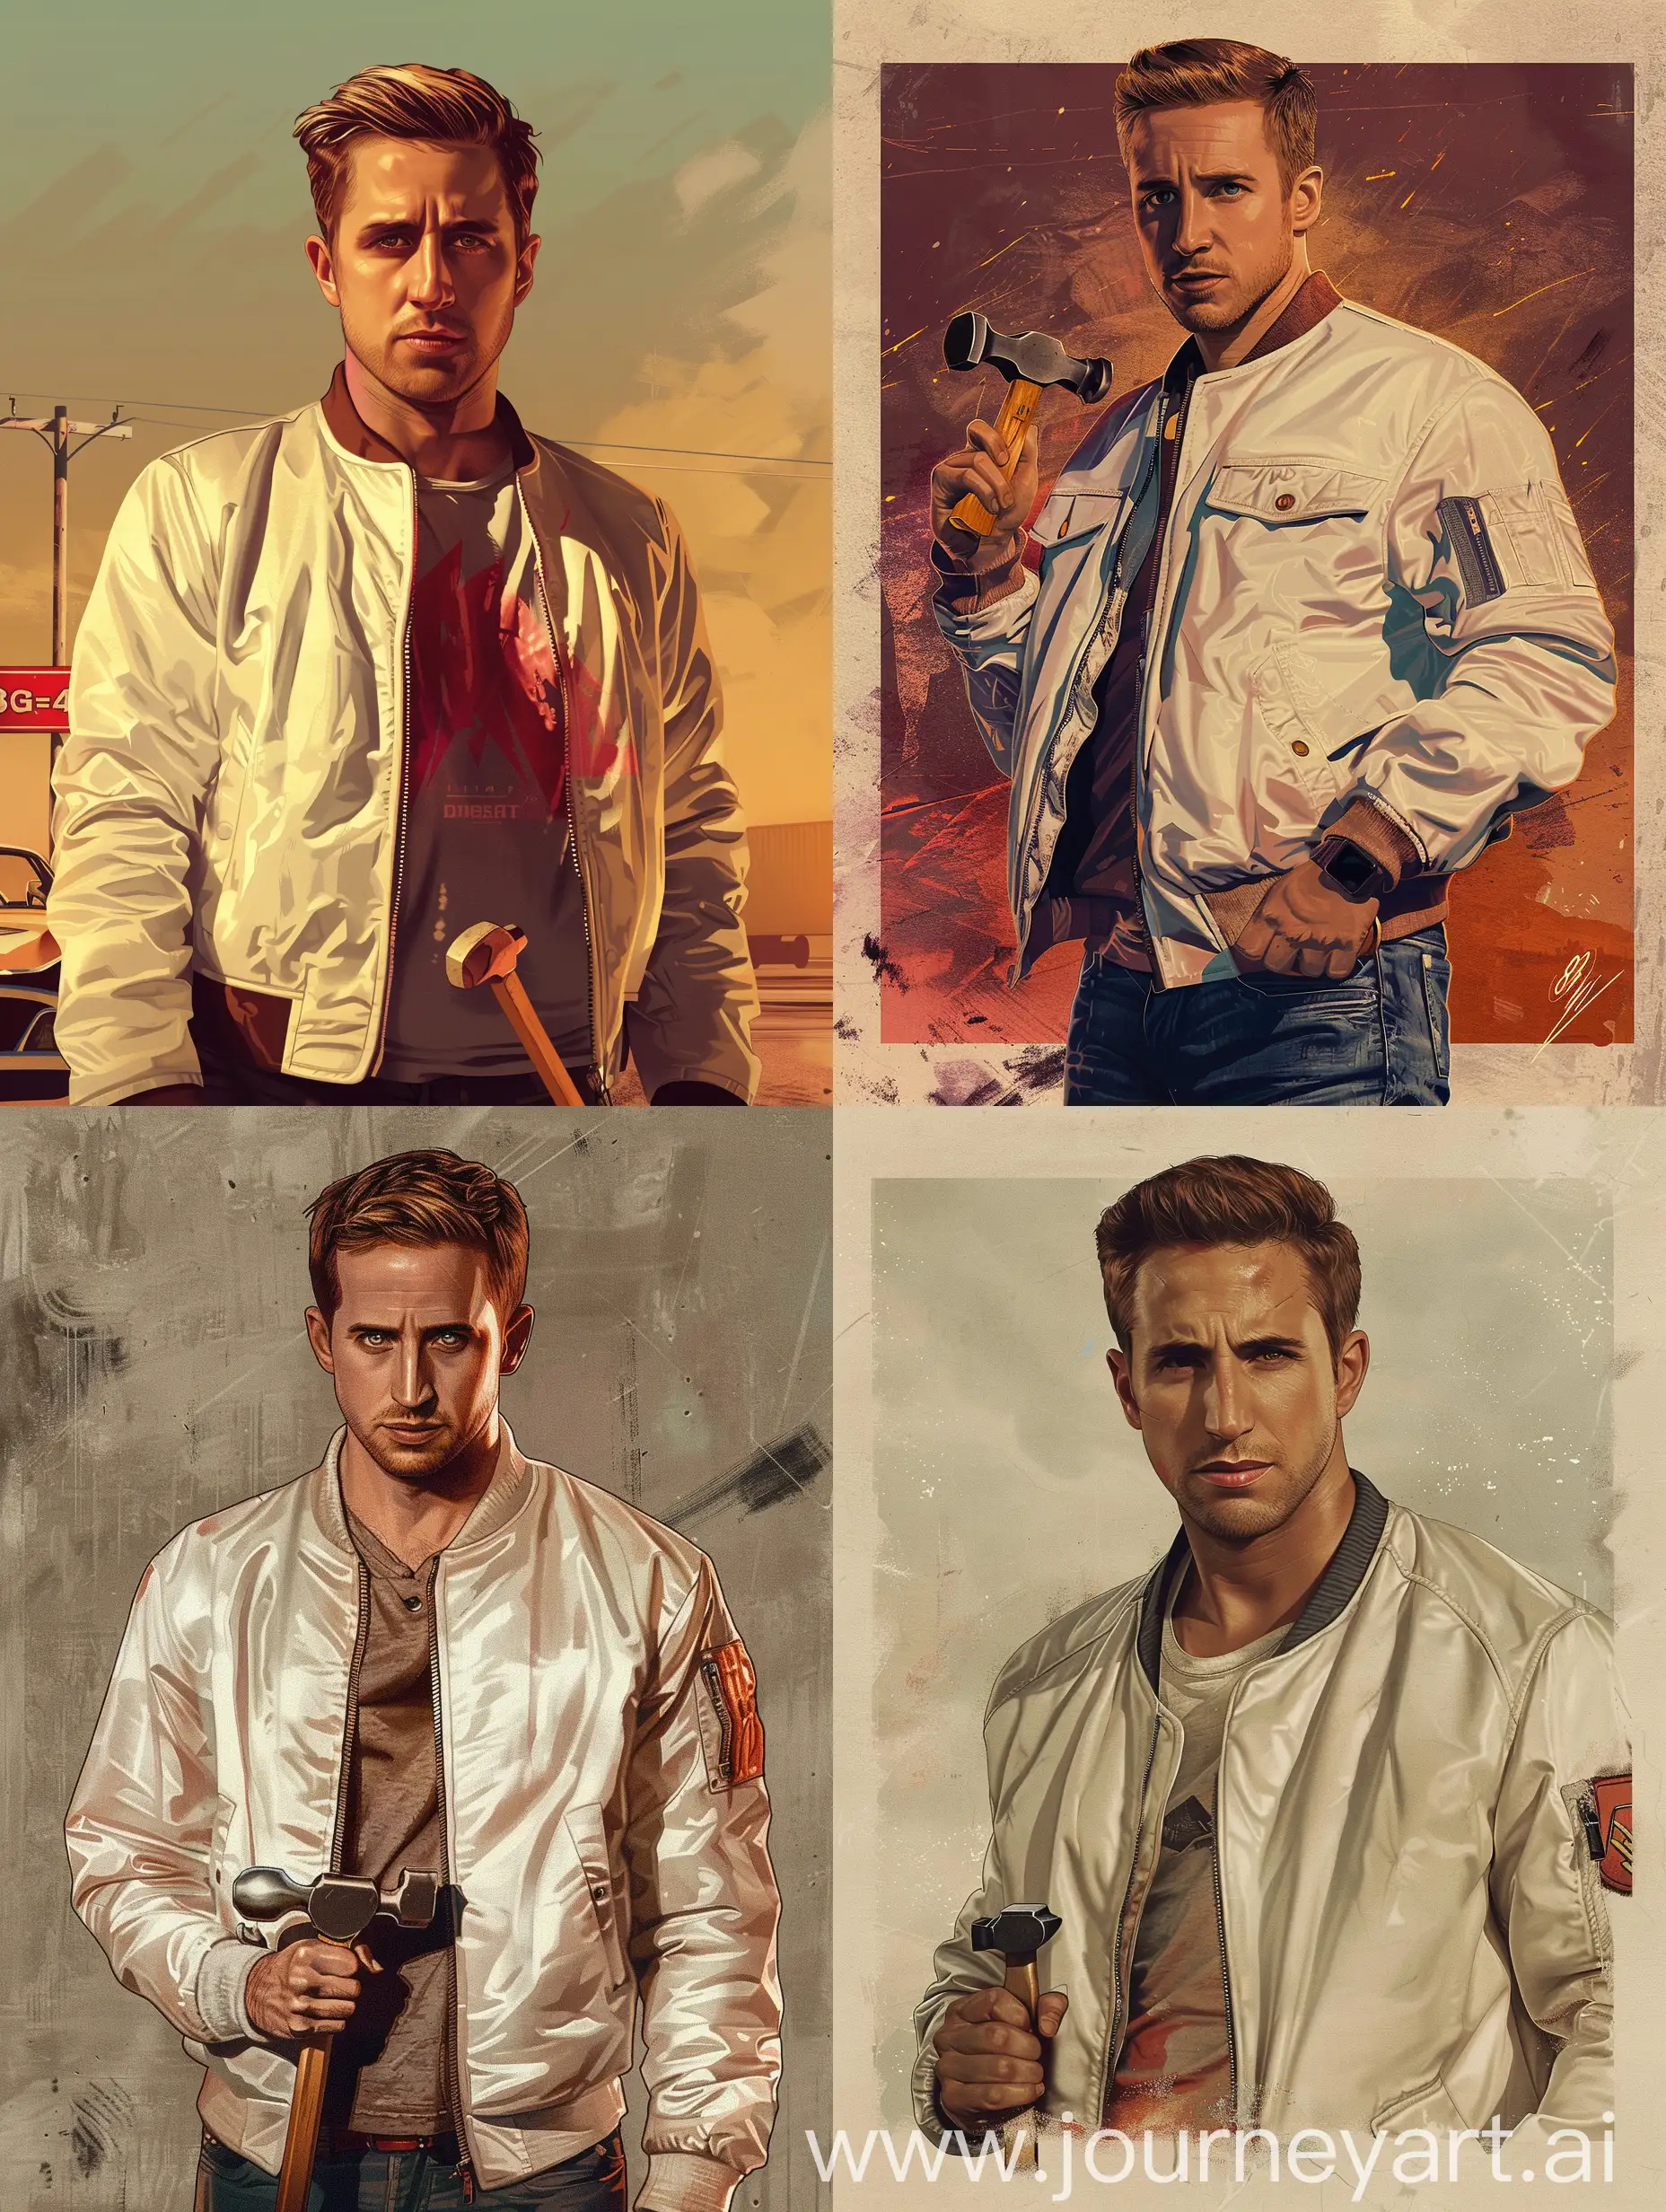 A poster in the style of GTA 4 loading screen. Ryan Gosling from the movie drive, with a small hammer. in a white bomber jacket from the movie drive. The art is stylized as in the download of the GTA 4. 8K ultrarealism.